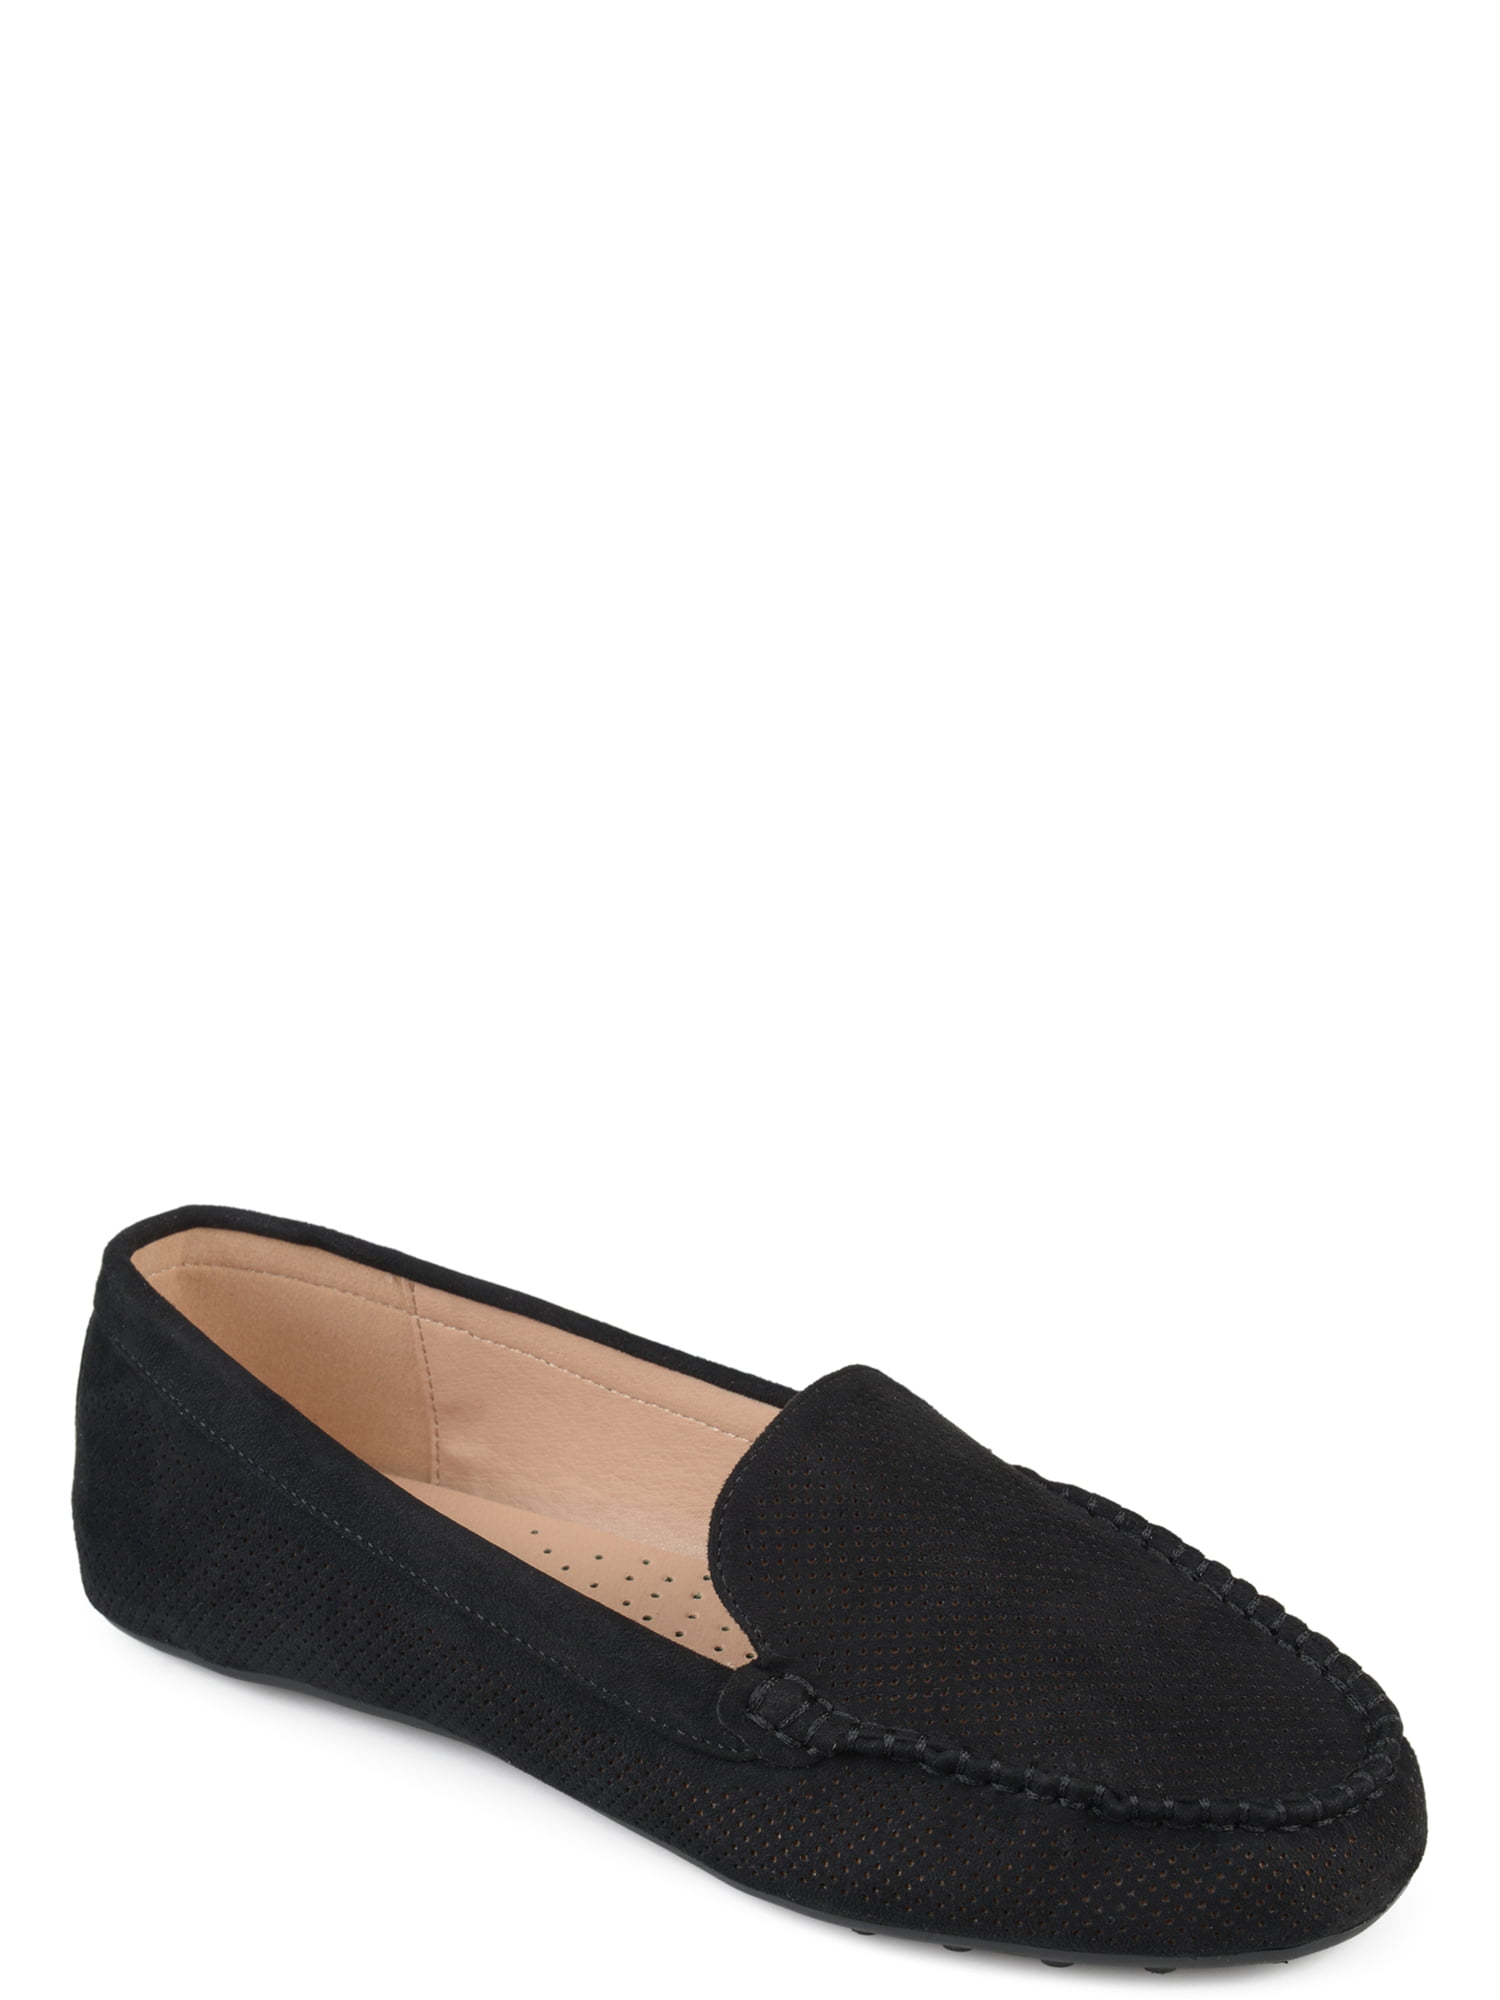 Brinley Co. Wome'ns Comfort Sole Faux Nubuck Laser Cut Loafers ...